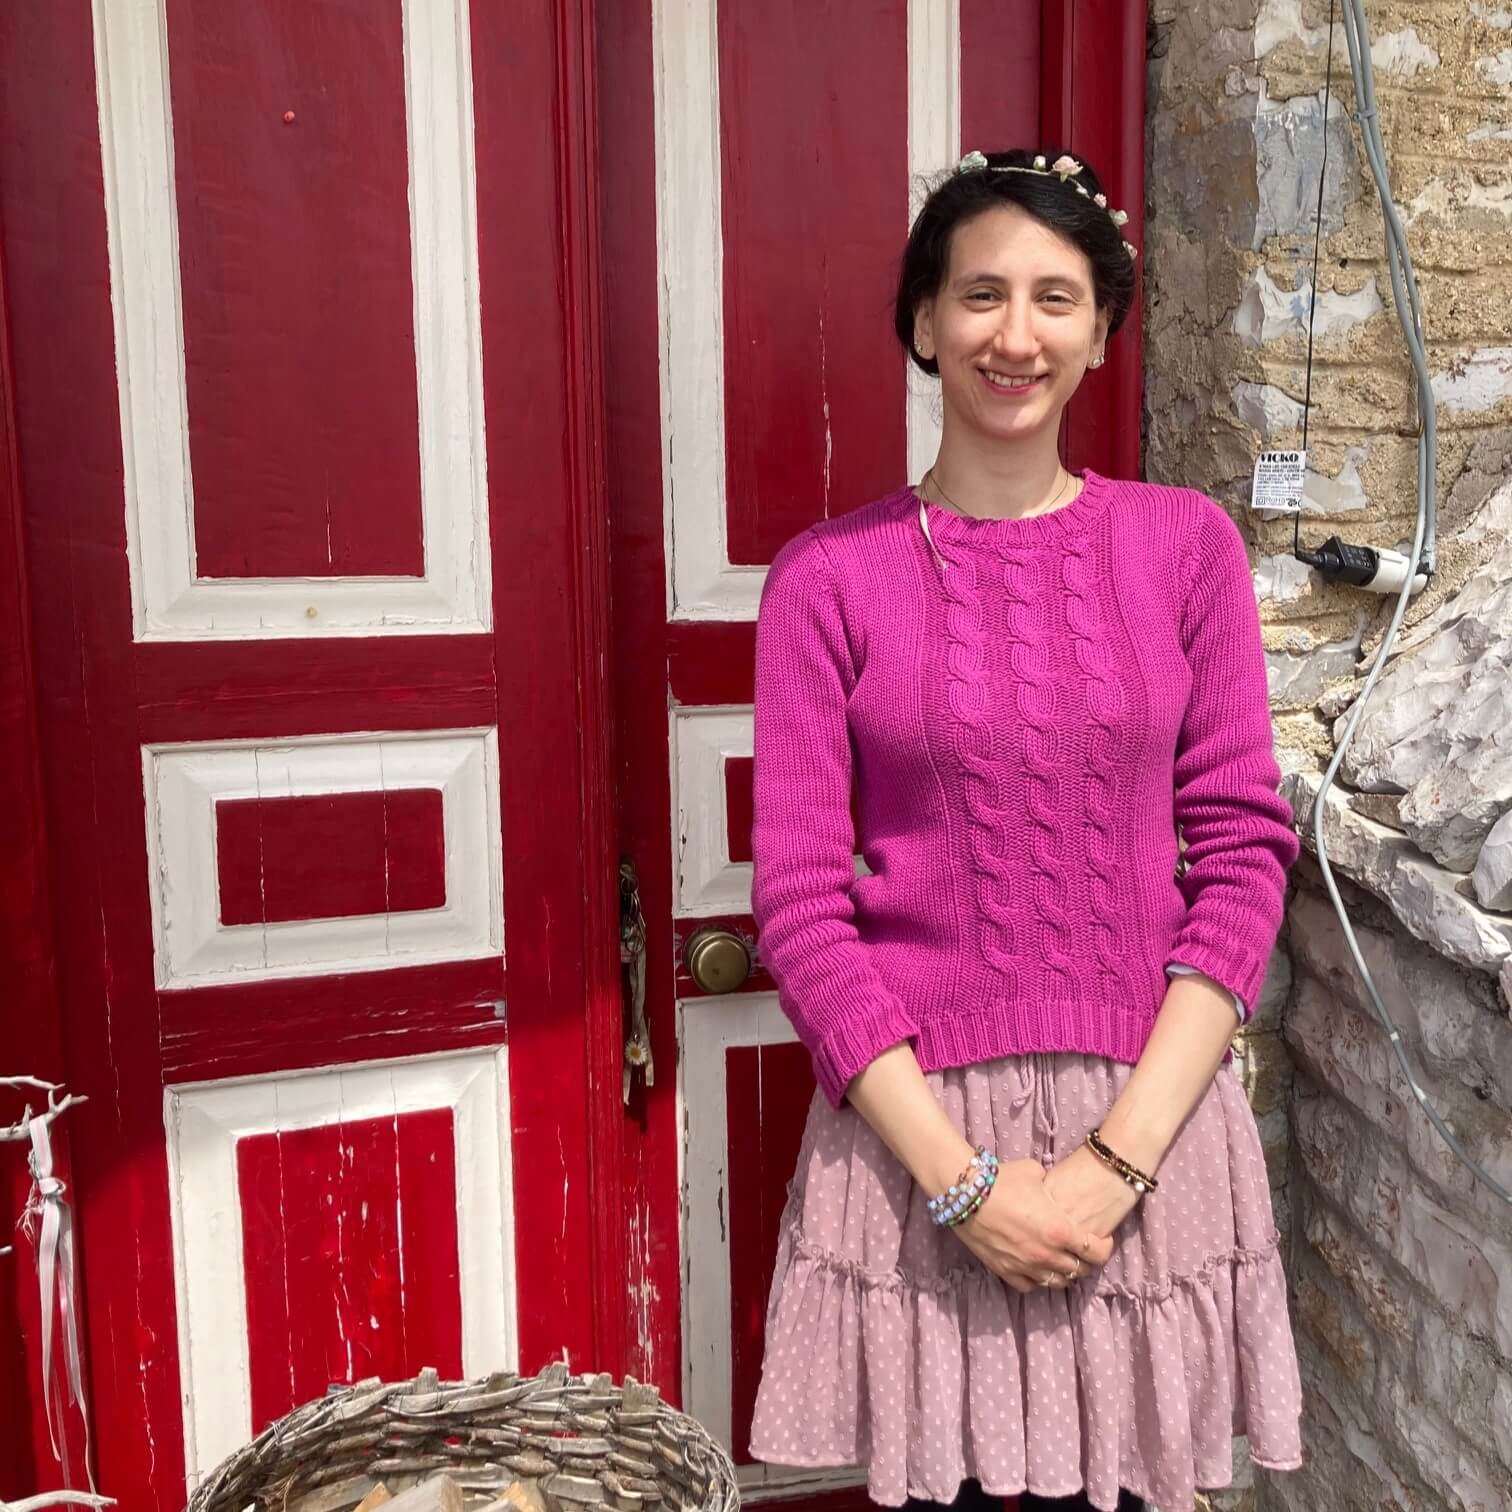 Konstantina, friend of The Slow Cyclist, stands outside her home in Vradeto, Zagori